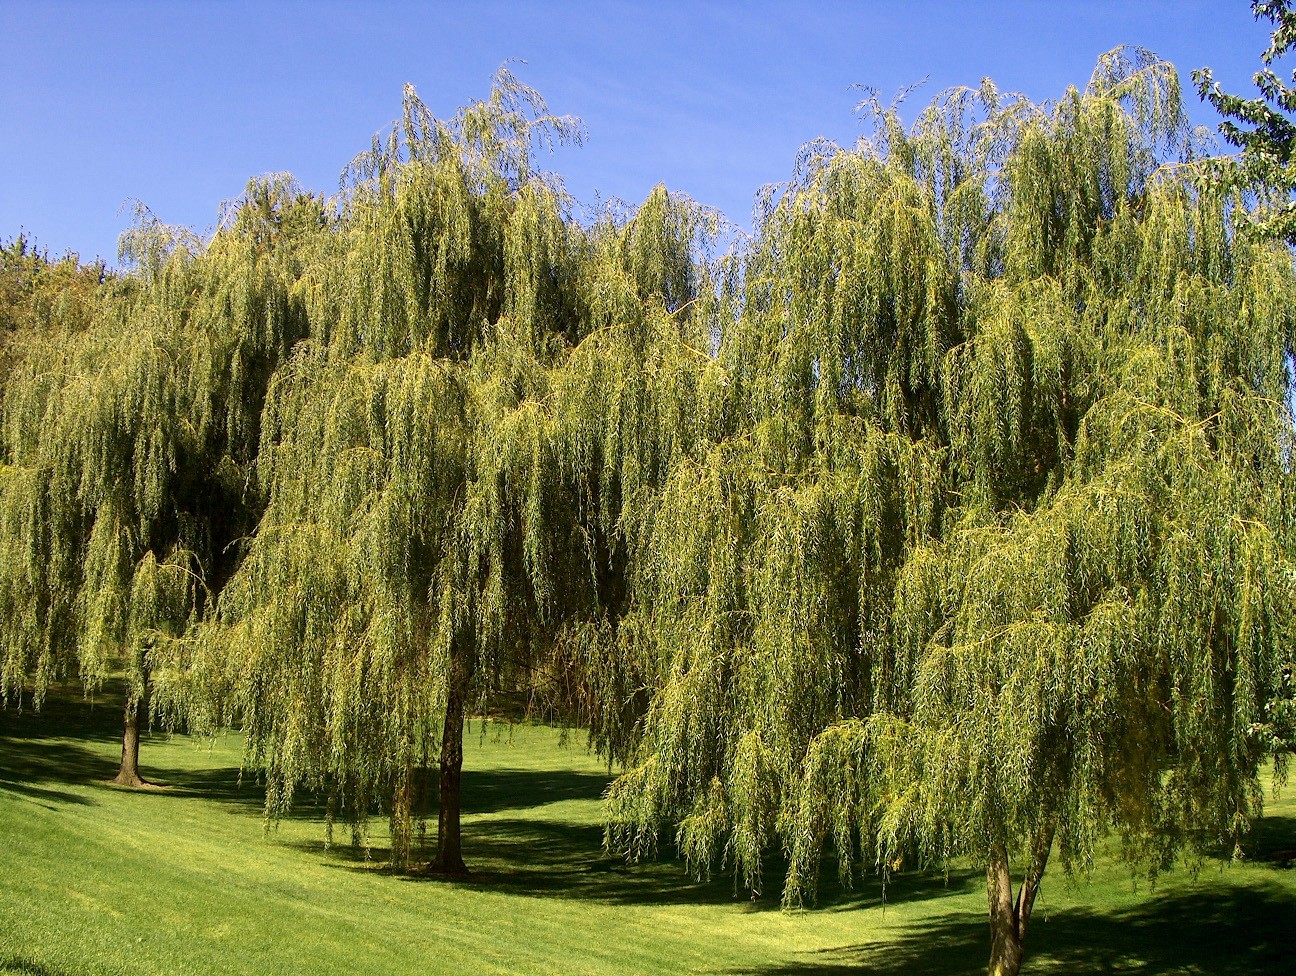 Willow onlineplantguide